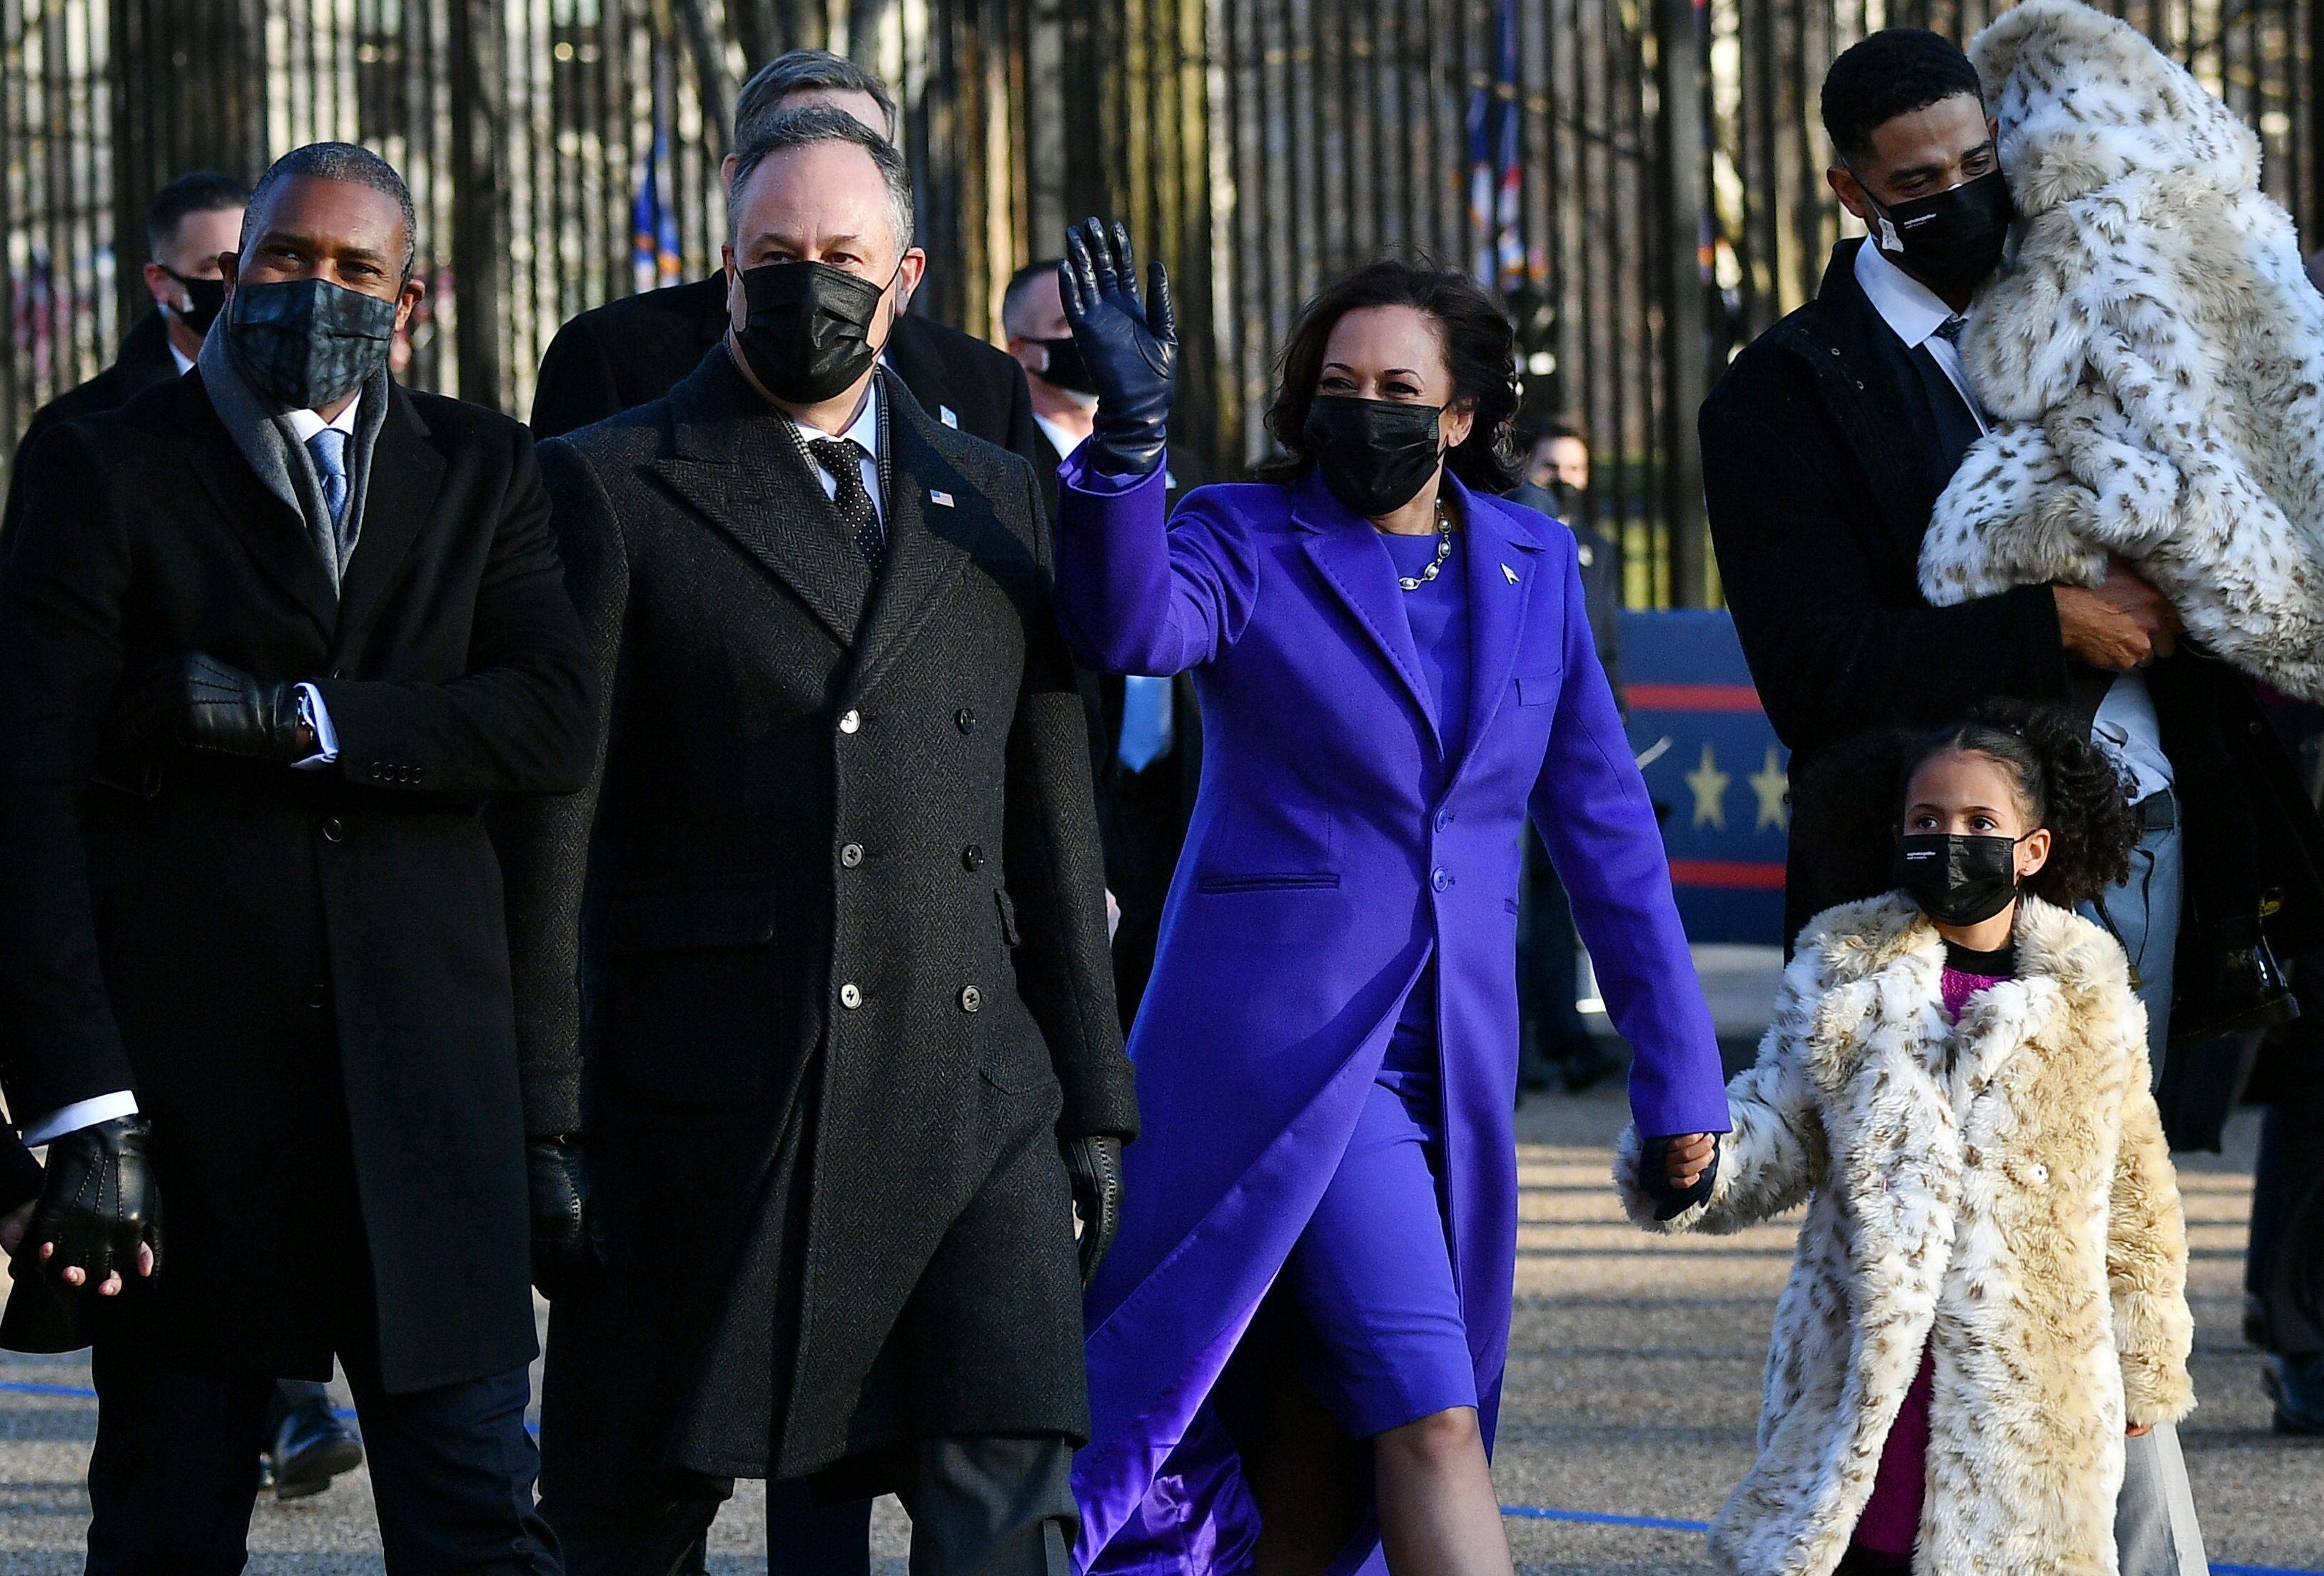 TOPSHOT - Vice President Kamala Harris and Second Gentleman Doug Emhoff along with family members walk along Pennsylvania Avenue to the White House in Washington, DC, after US President Joe Biden and Harris were sworn in, earlier on January 20, 2021. (Photo by MANDEL NGAN / AFP) (Photo by MANDEL NGAN/AFP via Getty Images)